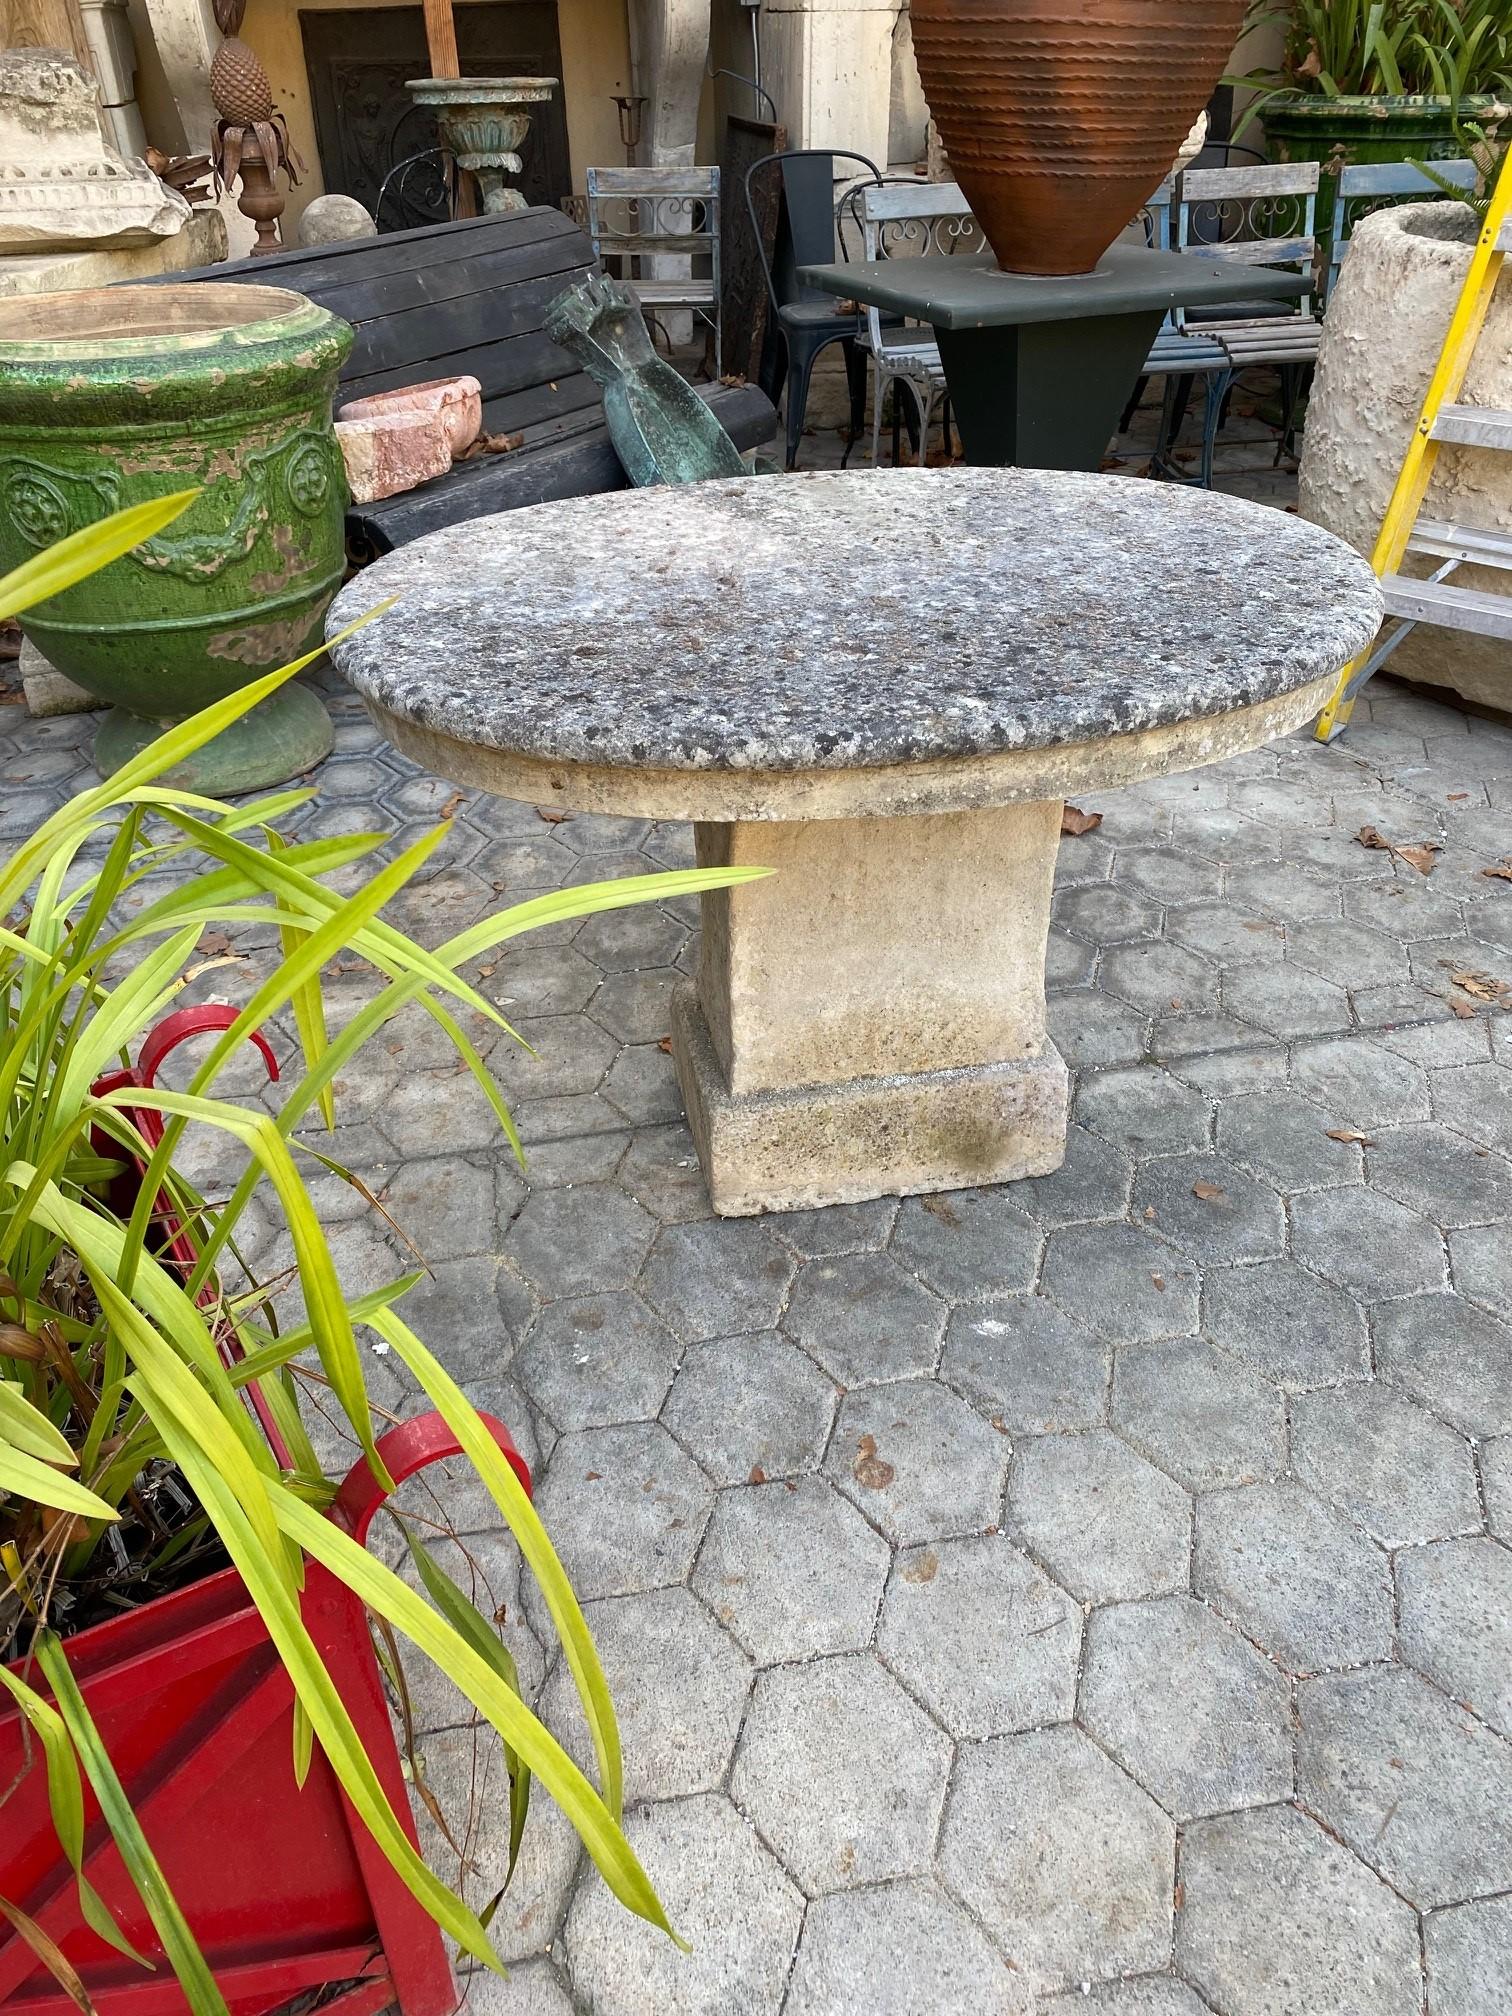 19th Century Hand carved Oval stone antique garden patio coffee outdoor indoor table for two or four people or more . It will be the perfect touch by an outdoor fireplace or on the patio next to your bedroom to have the morning coffee and welcome a